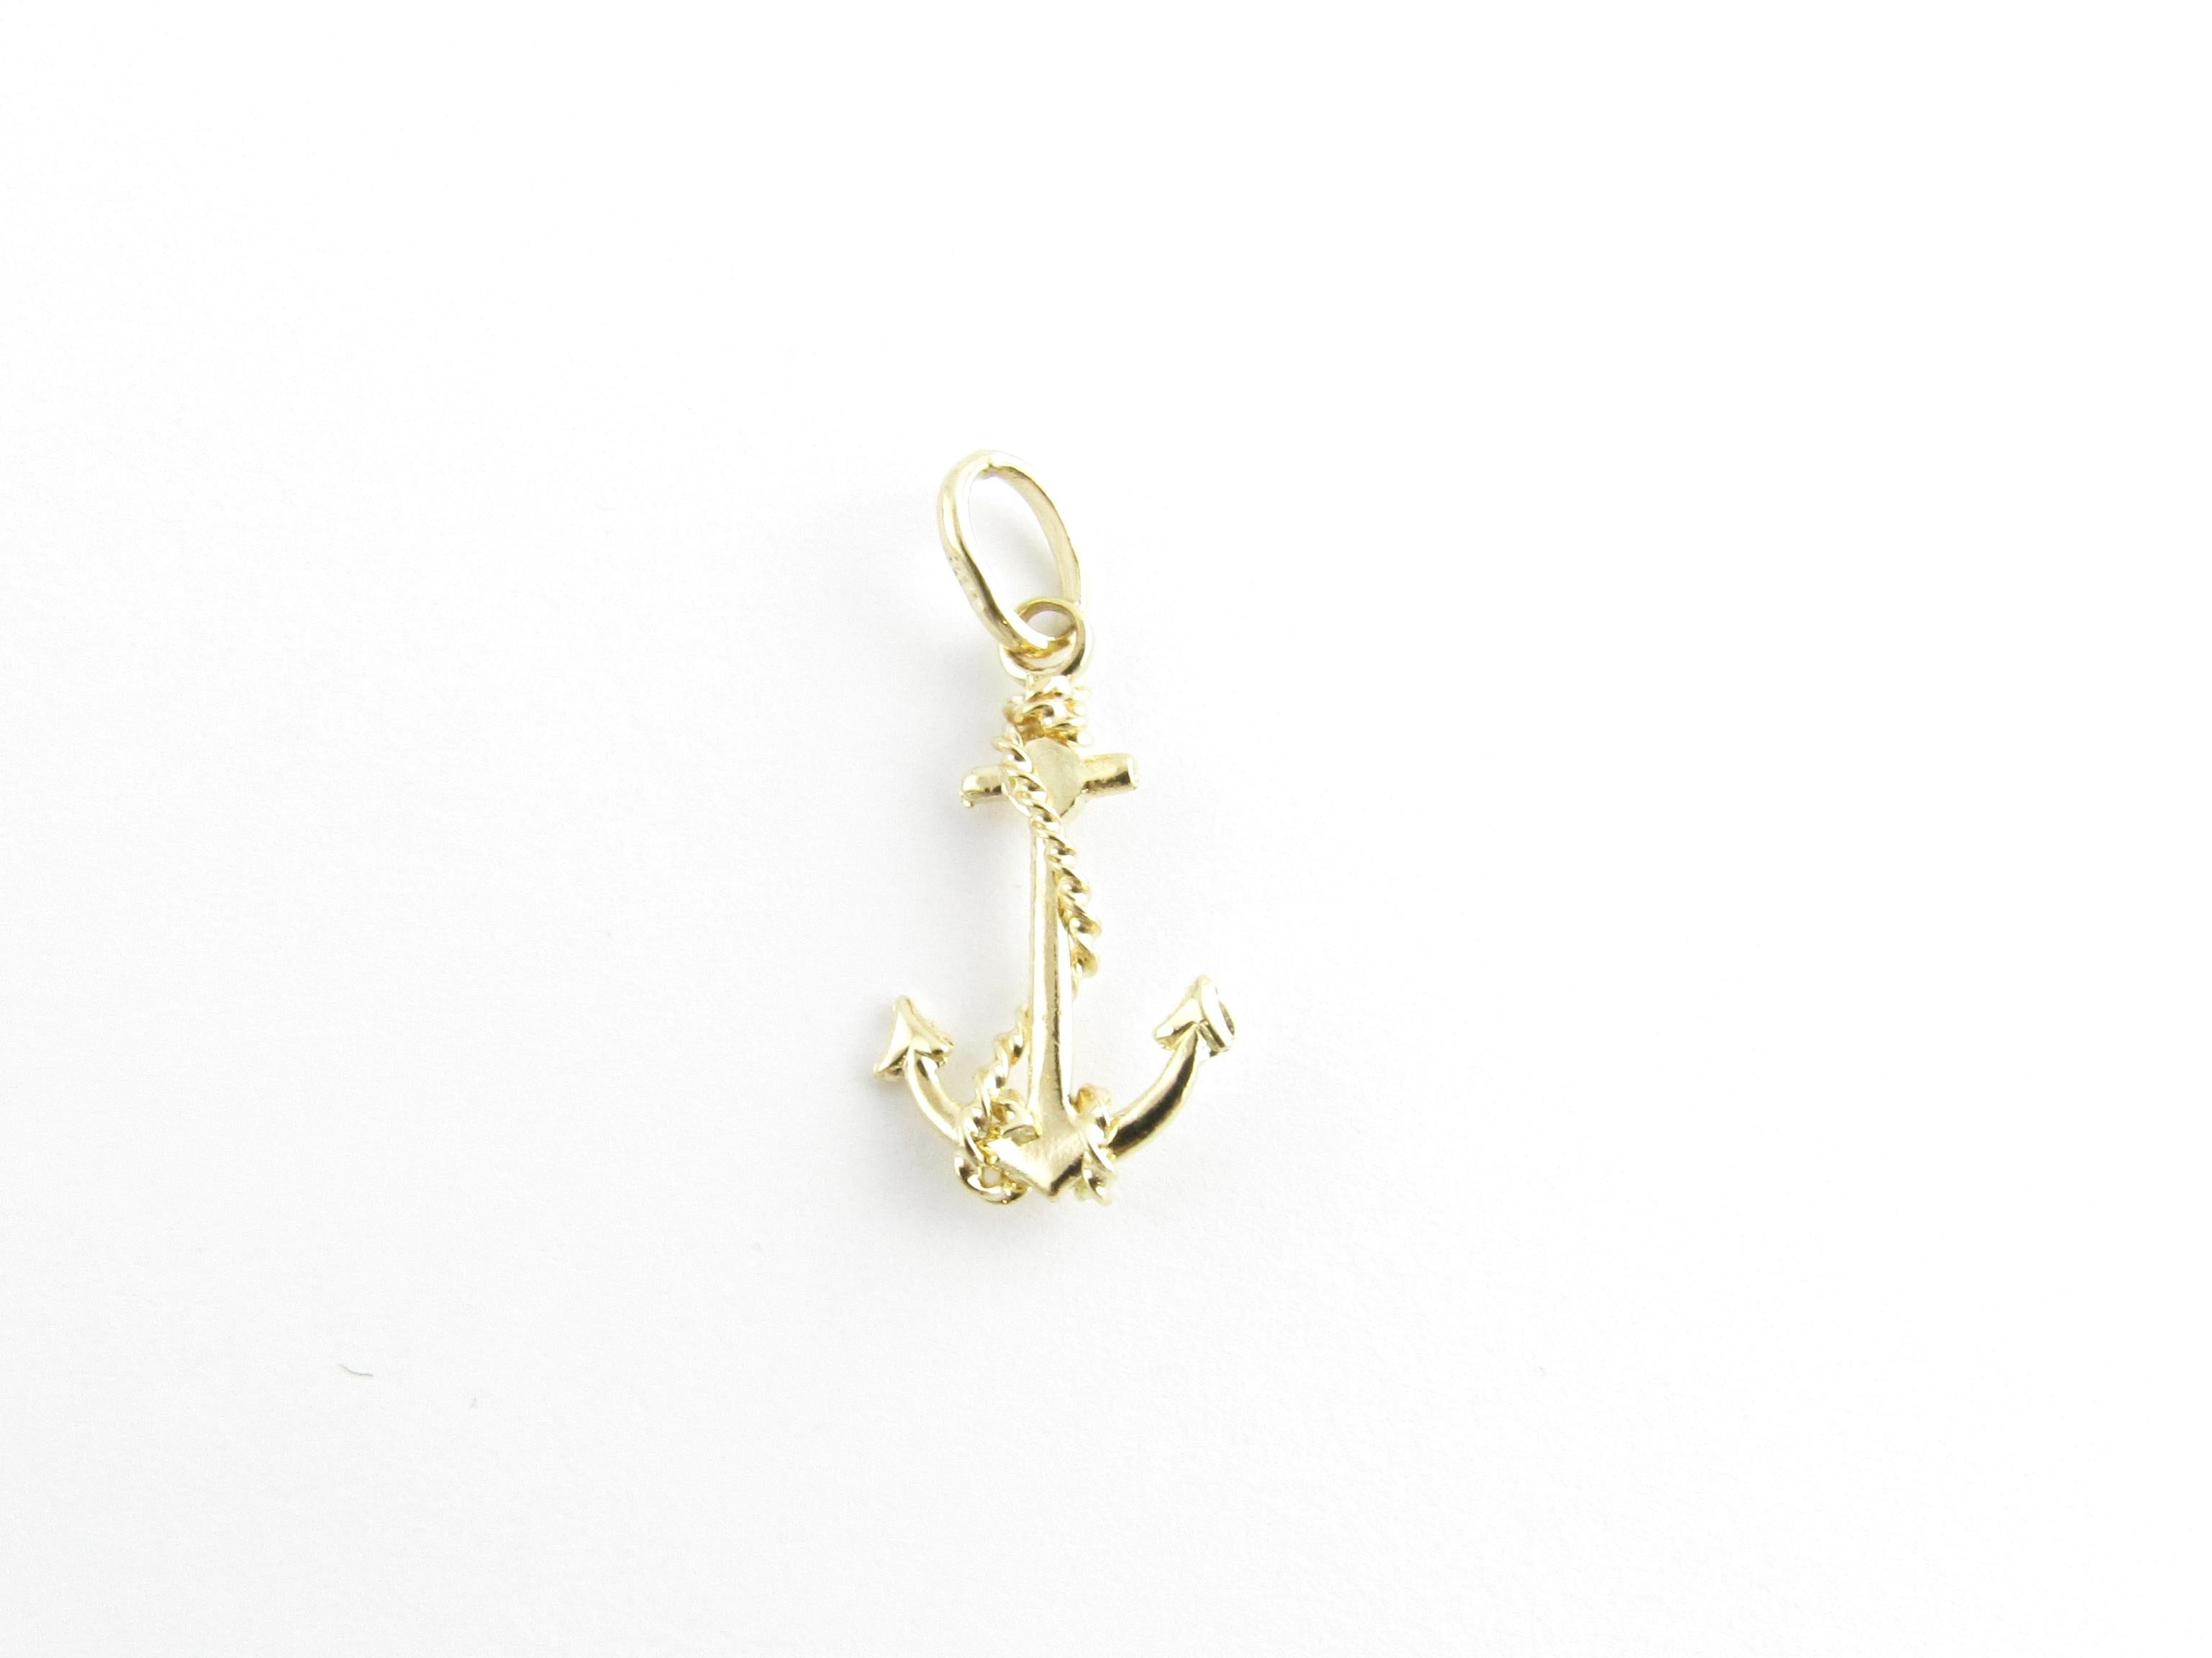 Vintage 14 Karat Yellow Gold Anchor Charm-

Anchors aweigh!

This lovely 3D charm features a miniature anchor beautifully detailed in 14K yellow gold.

Size: 19 mm x 11 mm (actual charm)

Weight: 0.5 dwt. / 0.8 gr.

Stamped: 14K

Very good